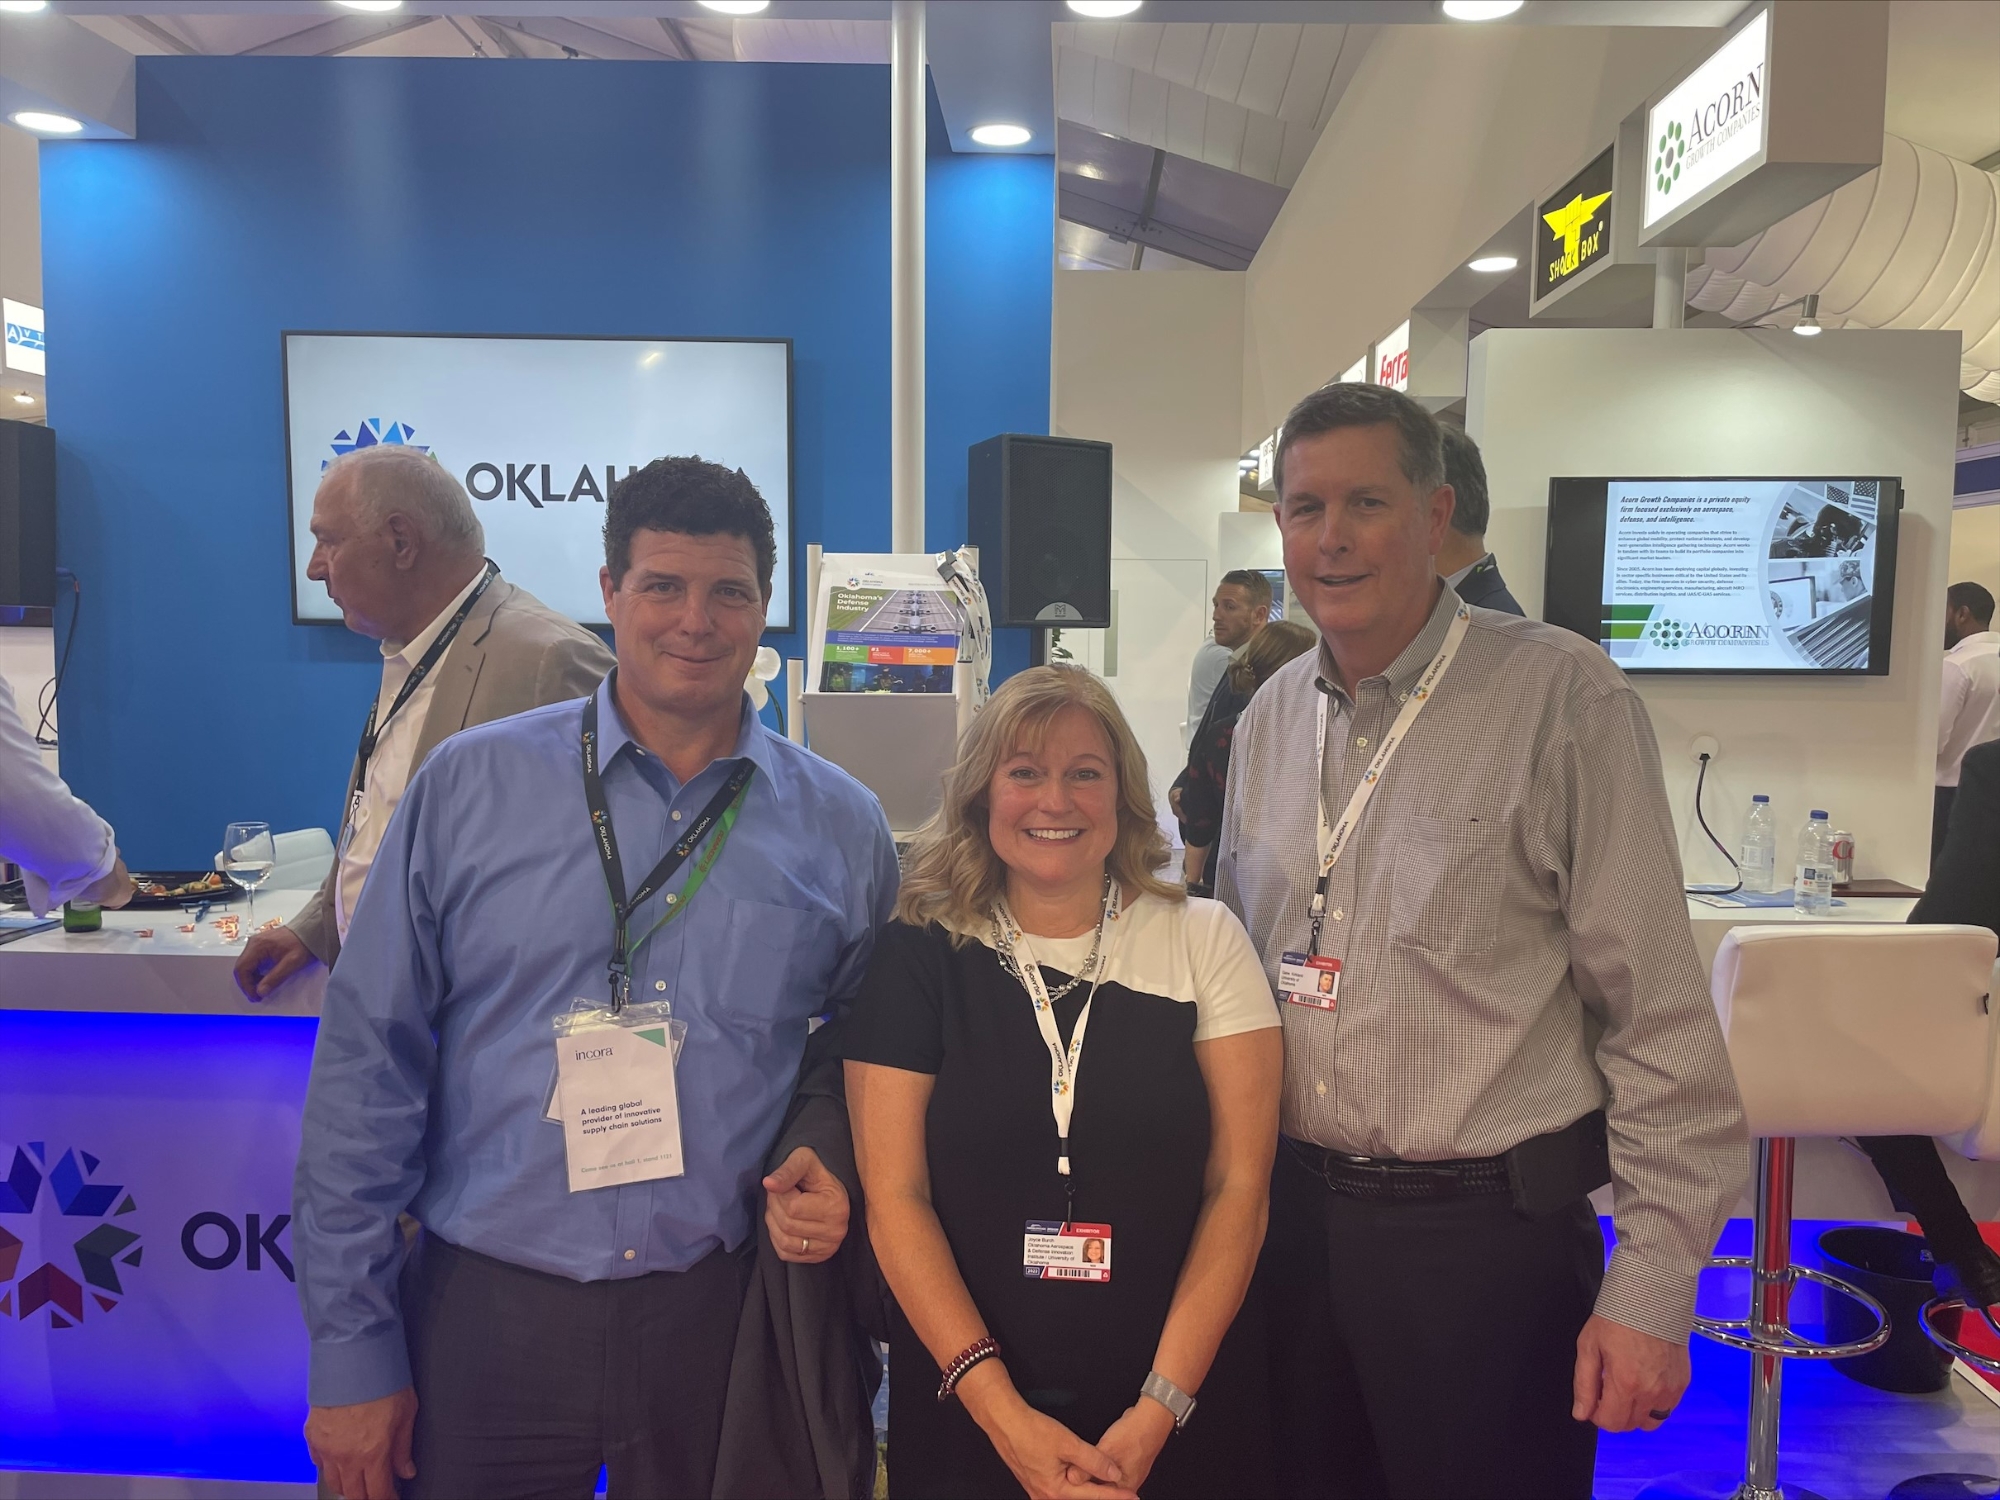 Dr. Robert Miller (left), CEO of Skydweller Aero, inc., a US -Spanish aerospace company developing renewably powered aircraft, with Joyce Burch and Gene Kirkland at the Oklahoma booth.